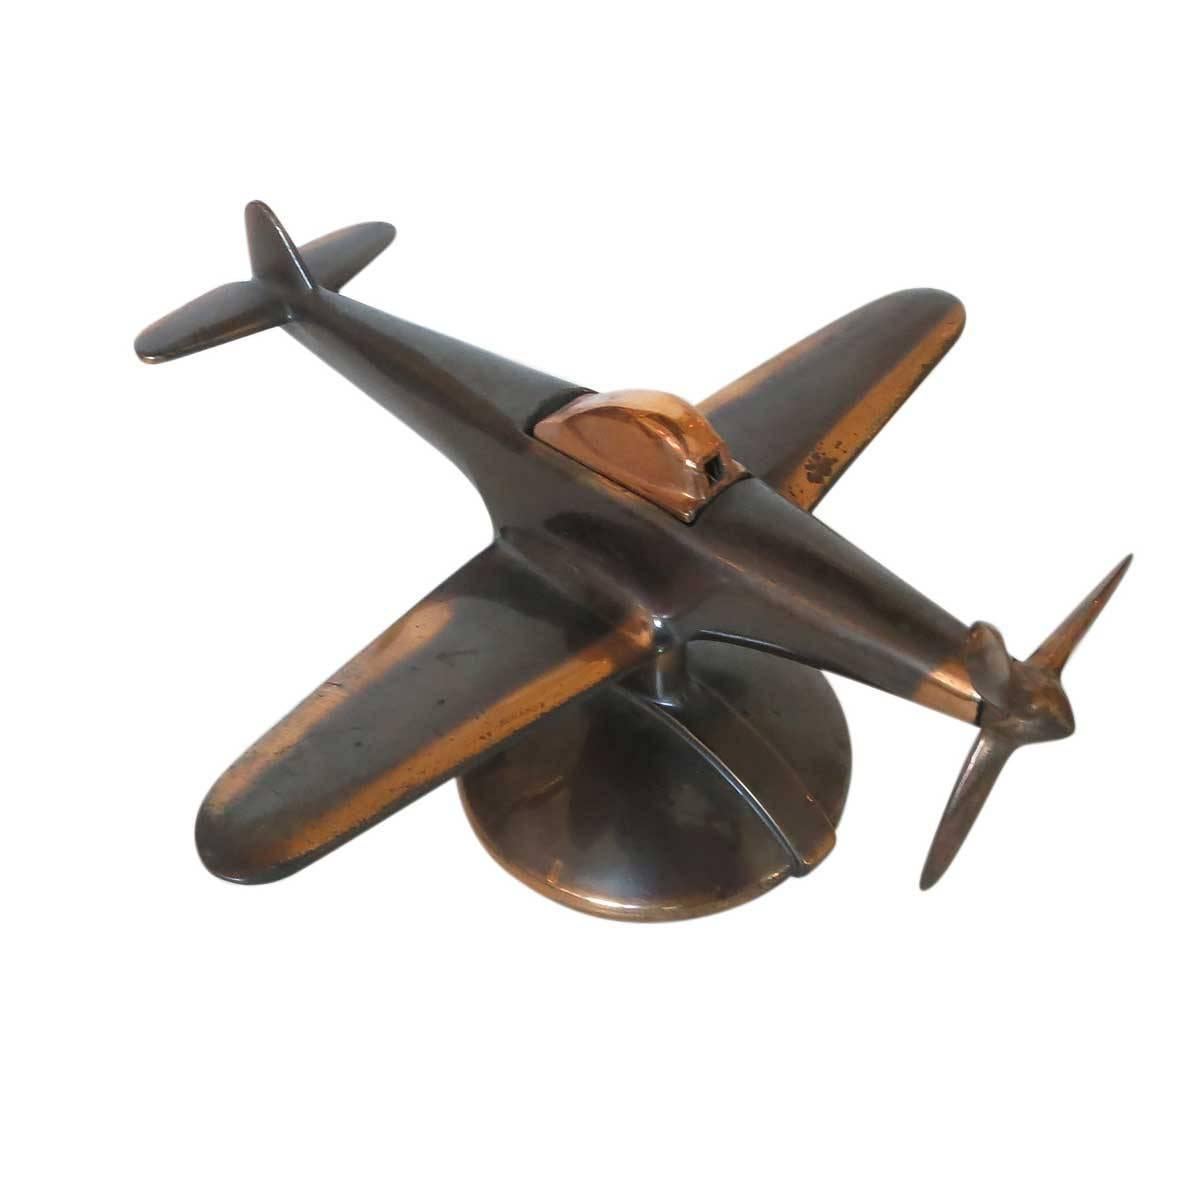 Mid-Century era Negbaur made desktop airplane lighter modeled after the North American P-51 Mustang II fighter plane used heavily in WWII. This lighter features the rare copper metal body and modernist design.

Upon turning the propeller the